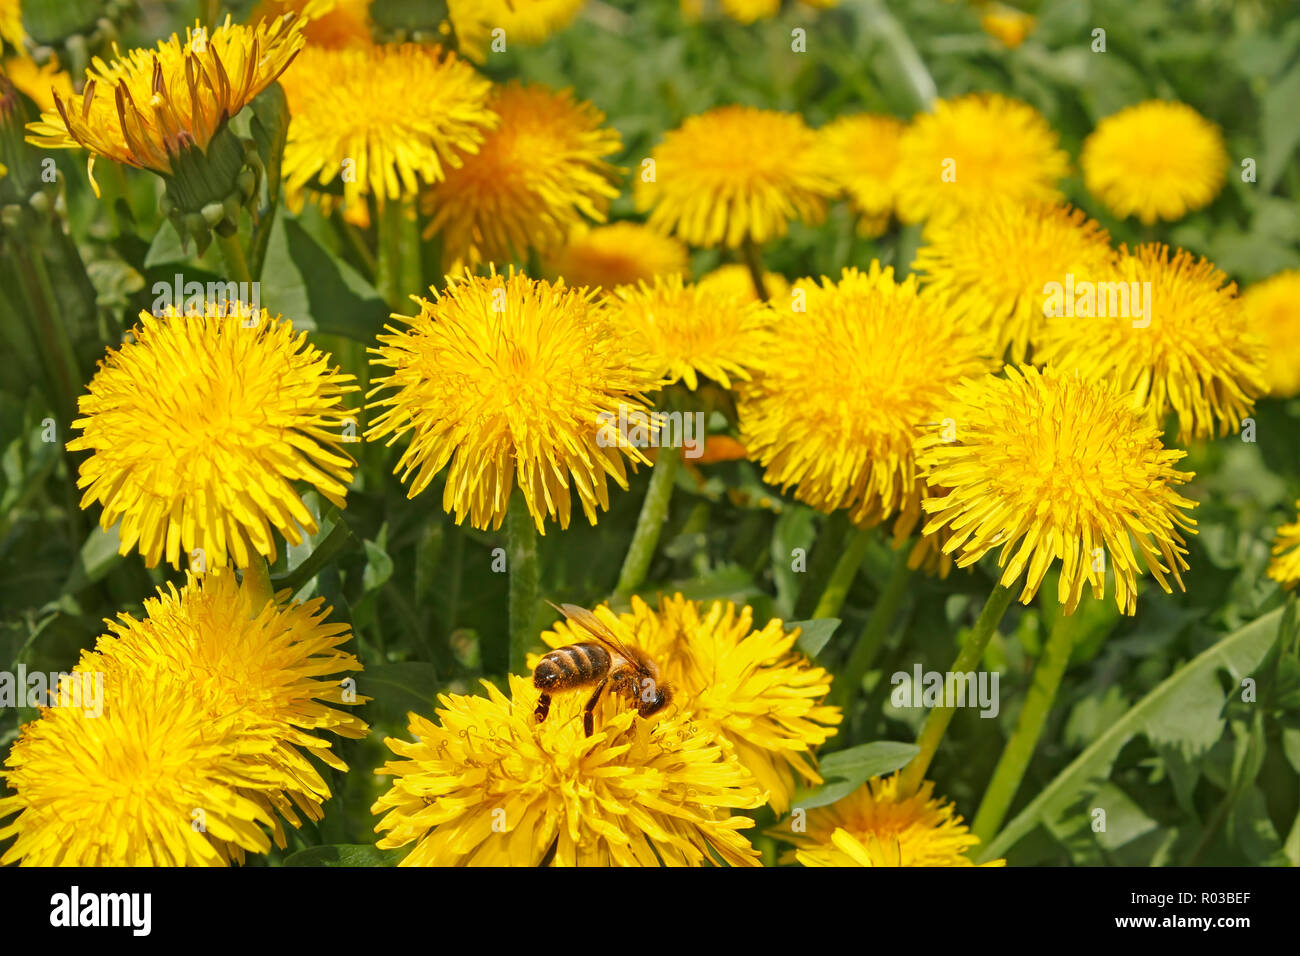 Group of dandelion flowers in sunlight close up. At one of the flowers sat bee Stock Photo